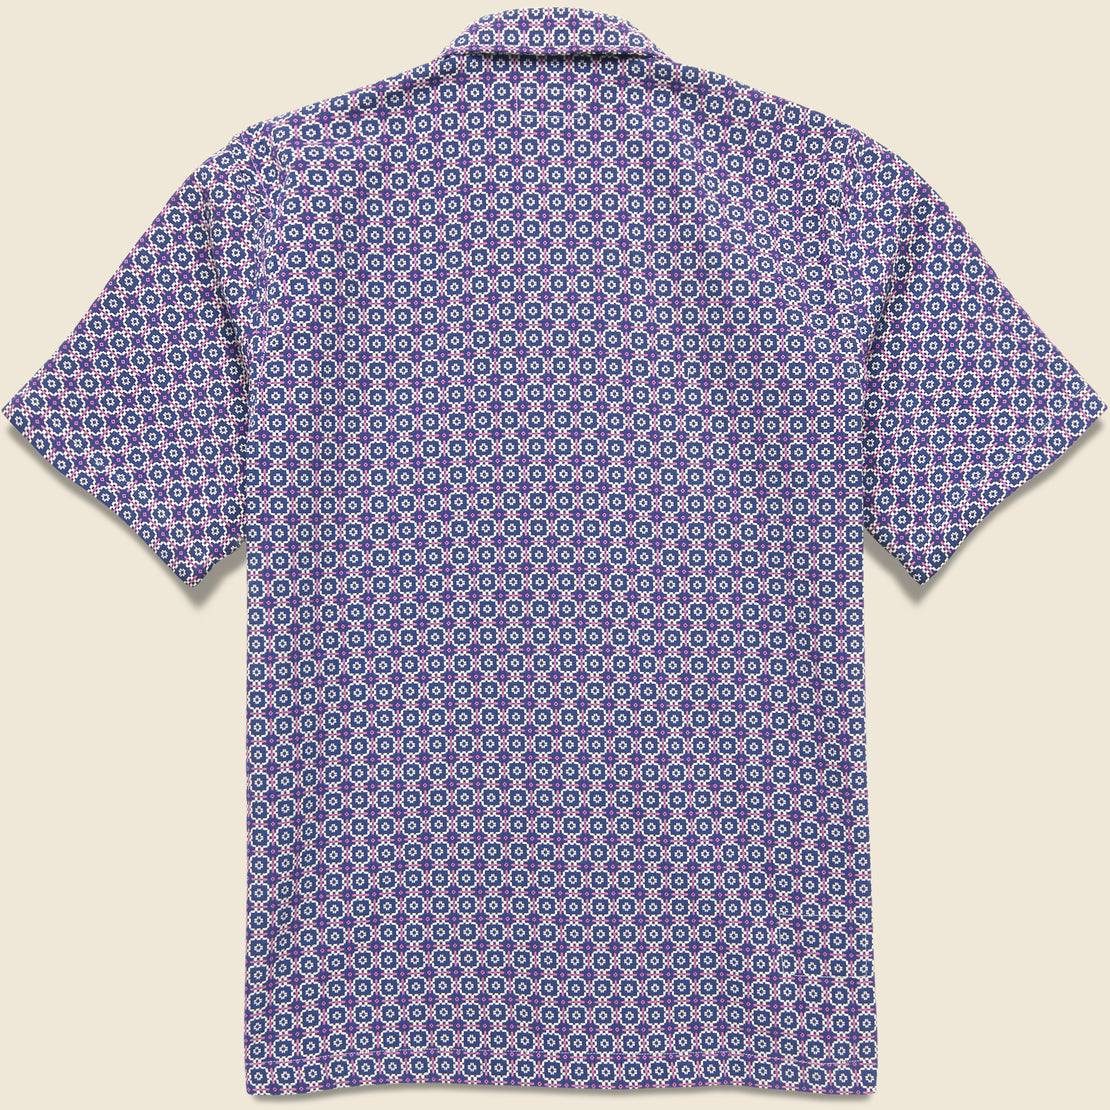 Tile Road Shirt - Navy/Pink/White - Universal Works - STAG Provisions - Tops - S/S Woven - Other Pattern